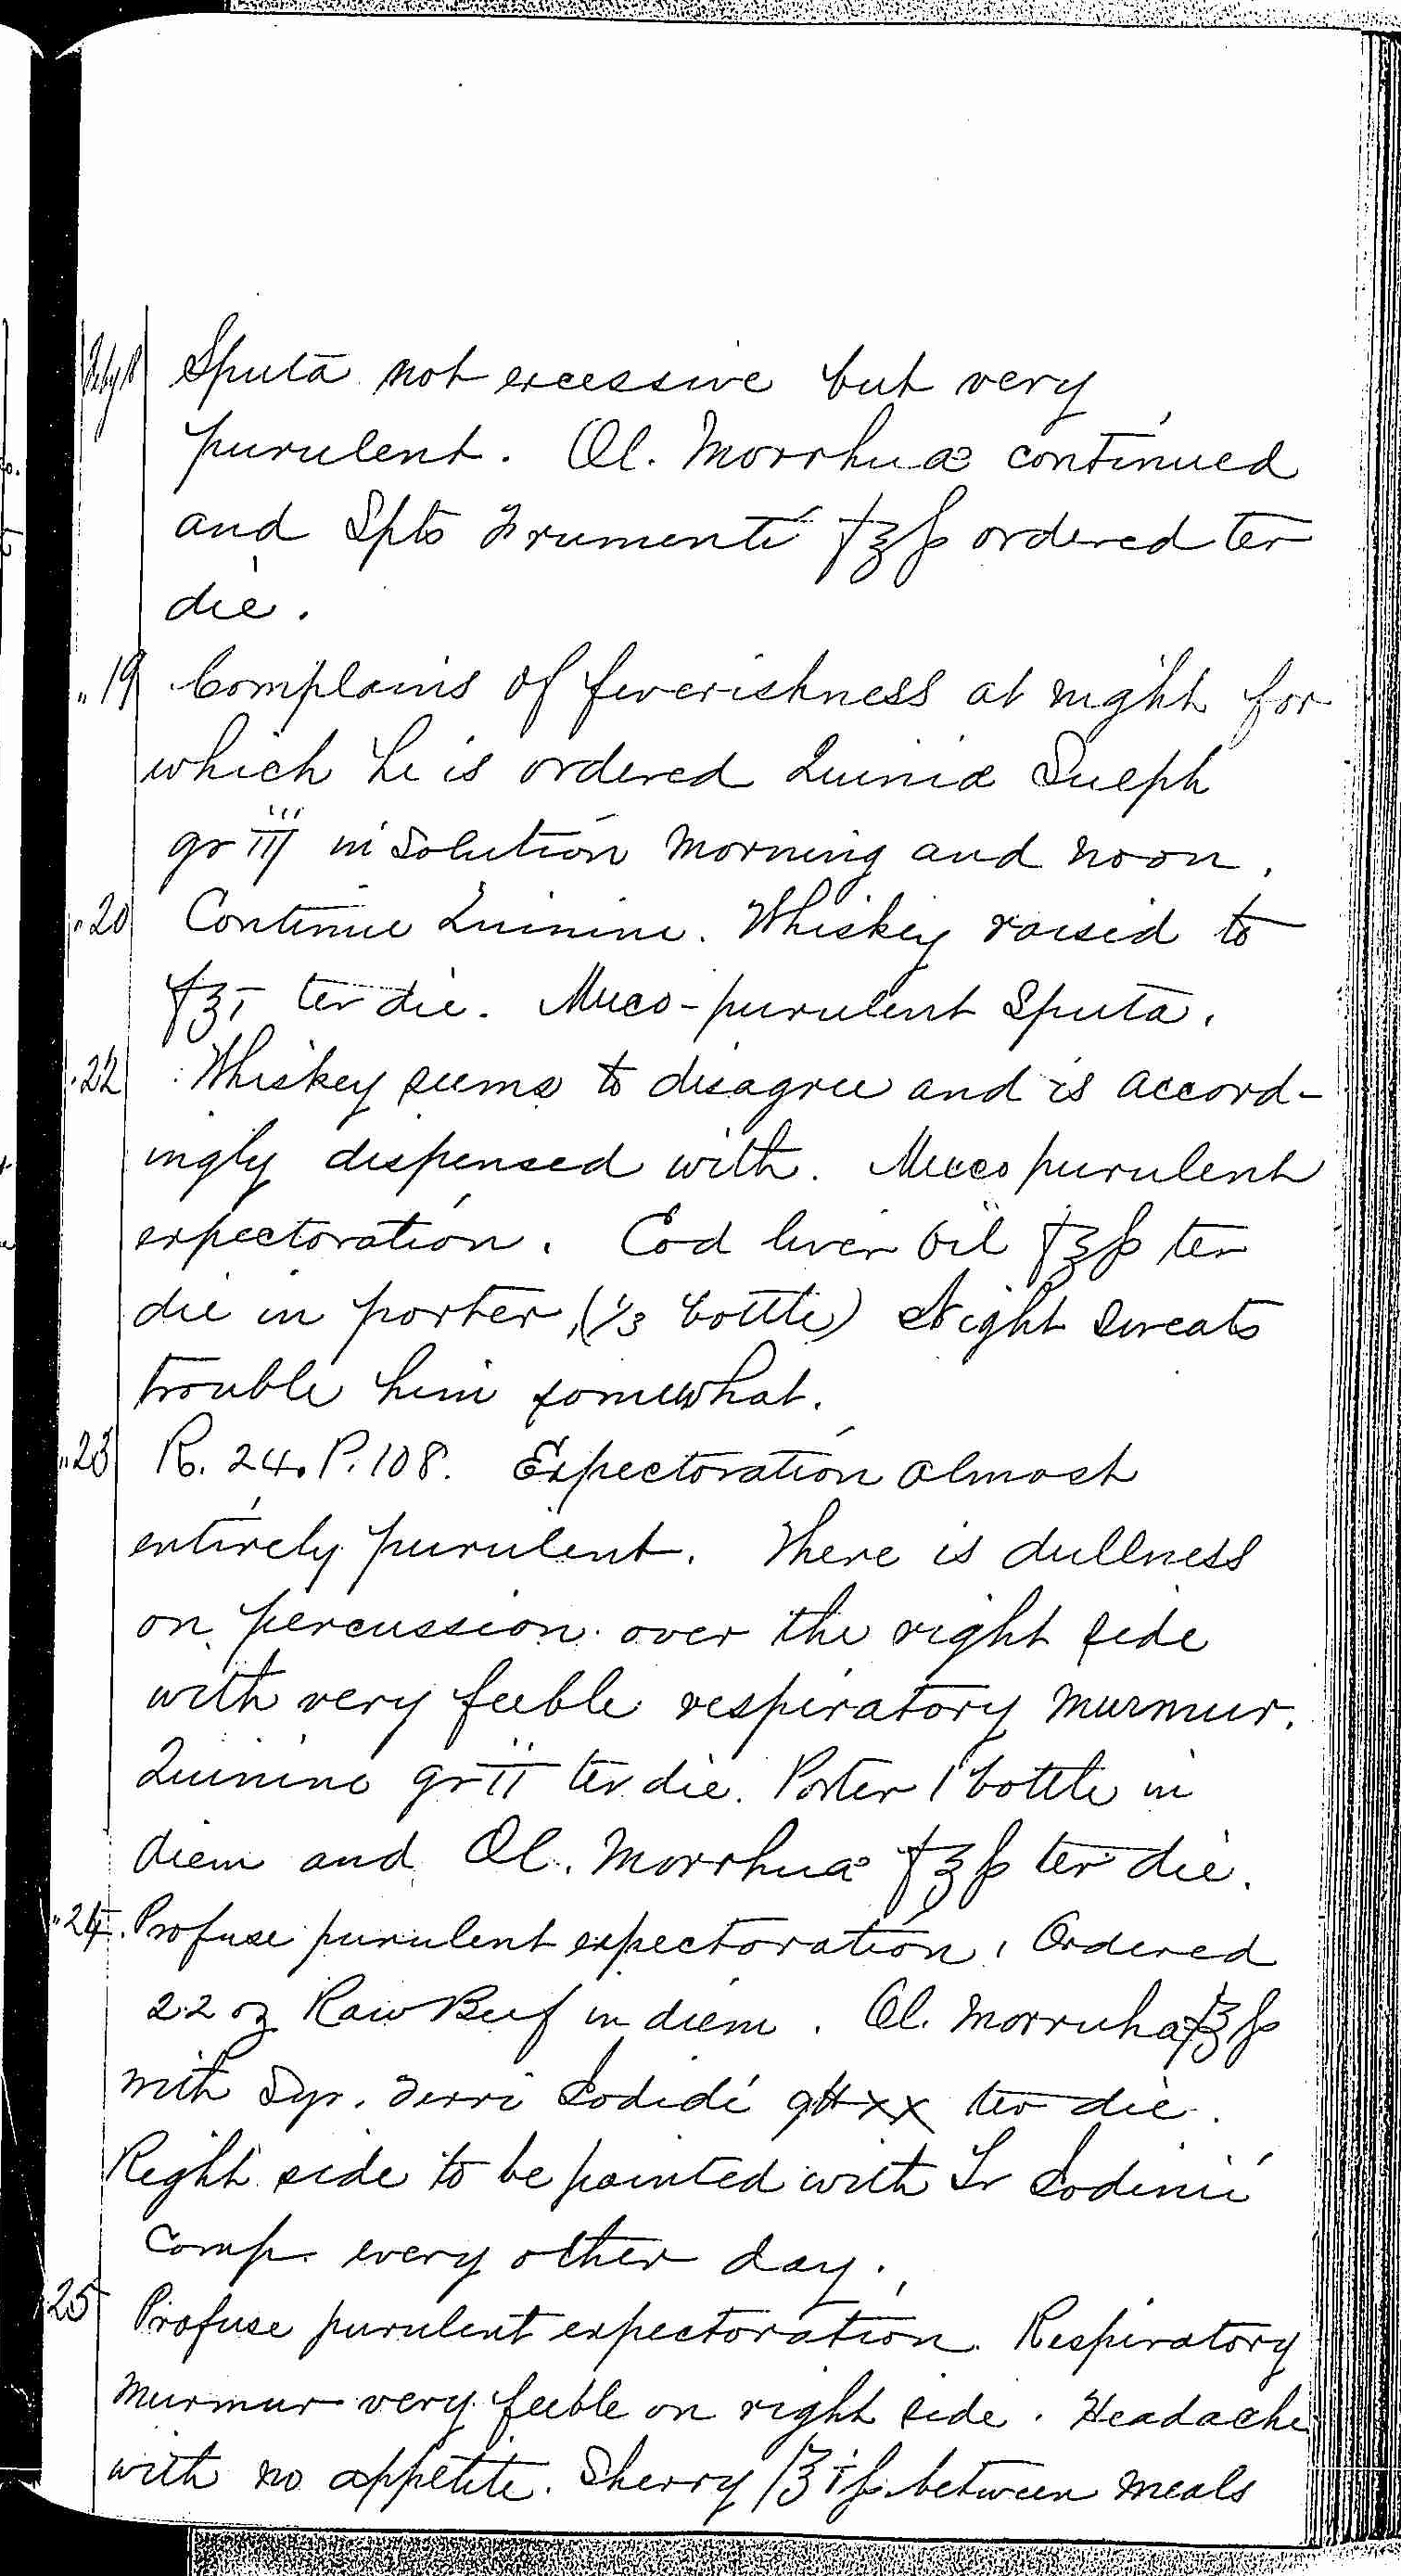 Entry for Peter C. Cheeks (page 7 of 16) in the log Hospital Tickets and Case Papers - Naval Hospital - Washington, D.C. - 1868-69